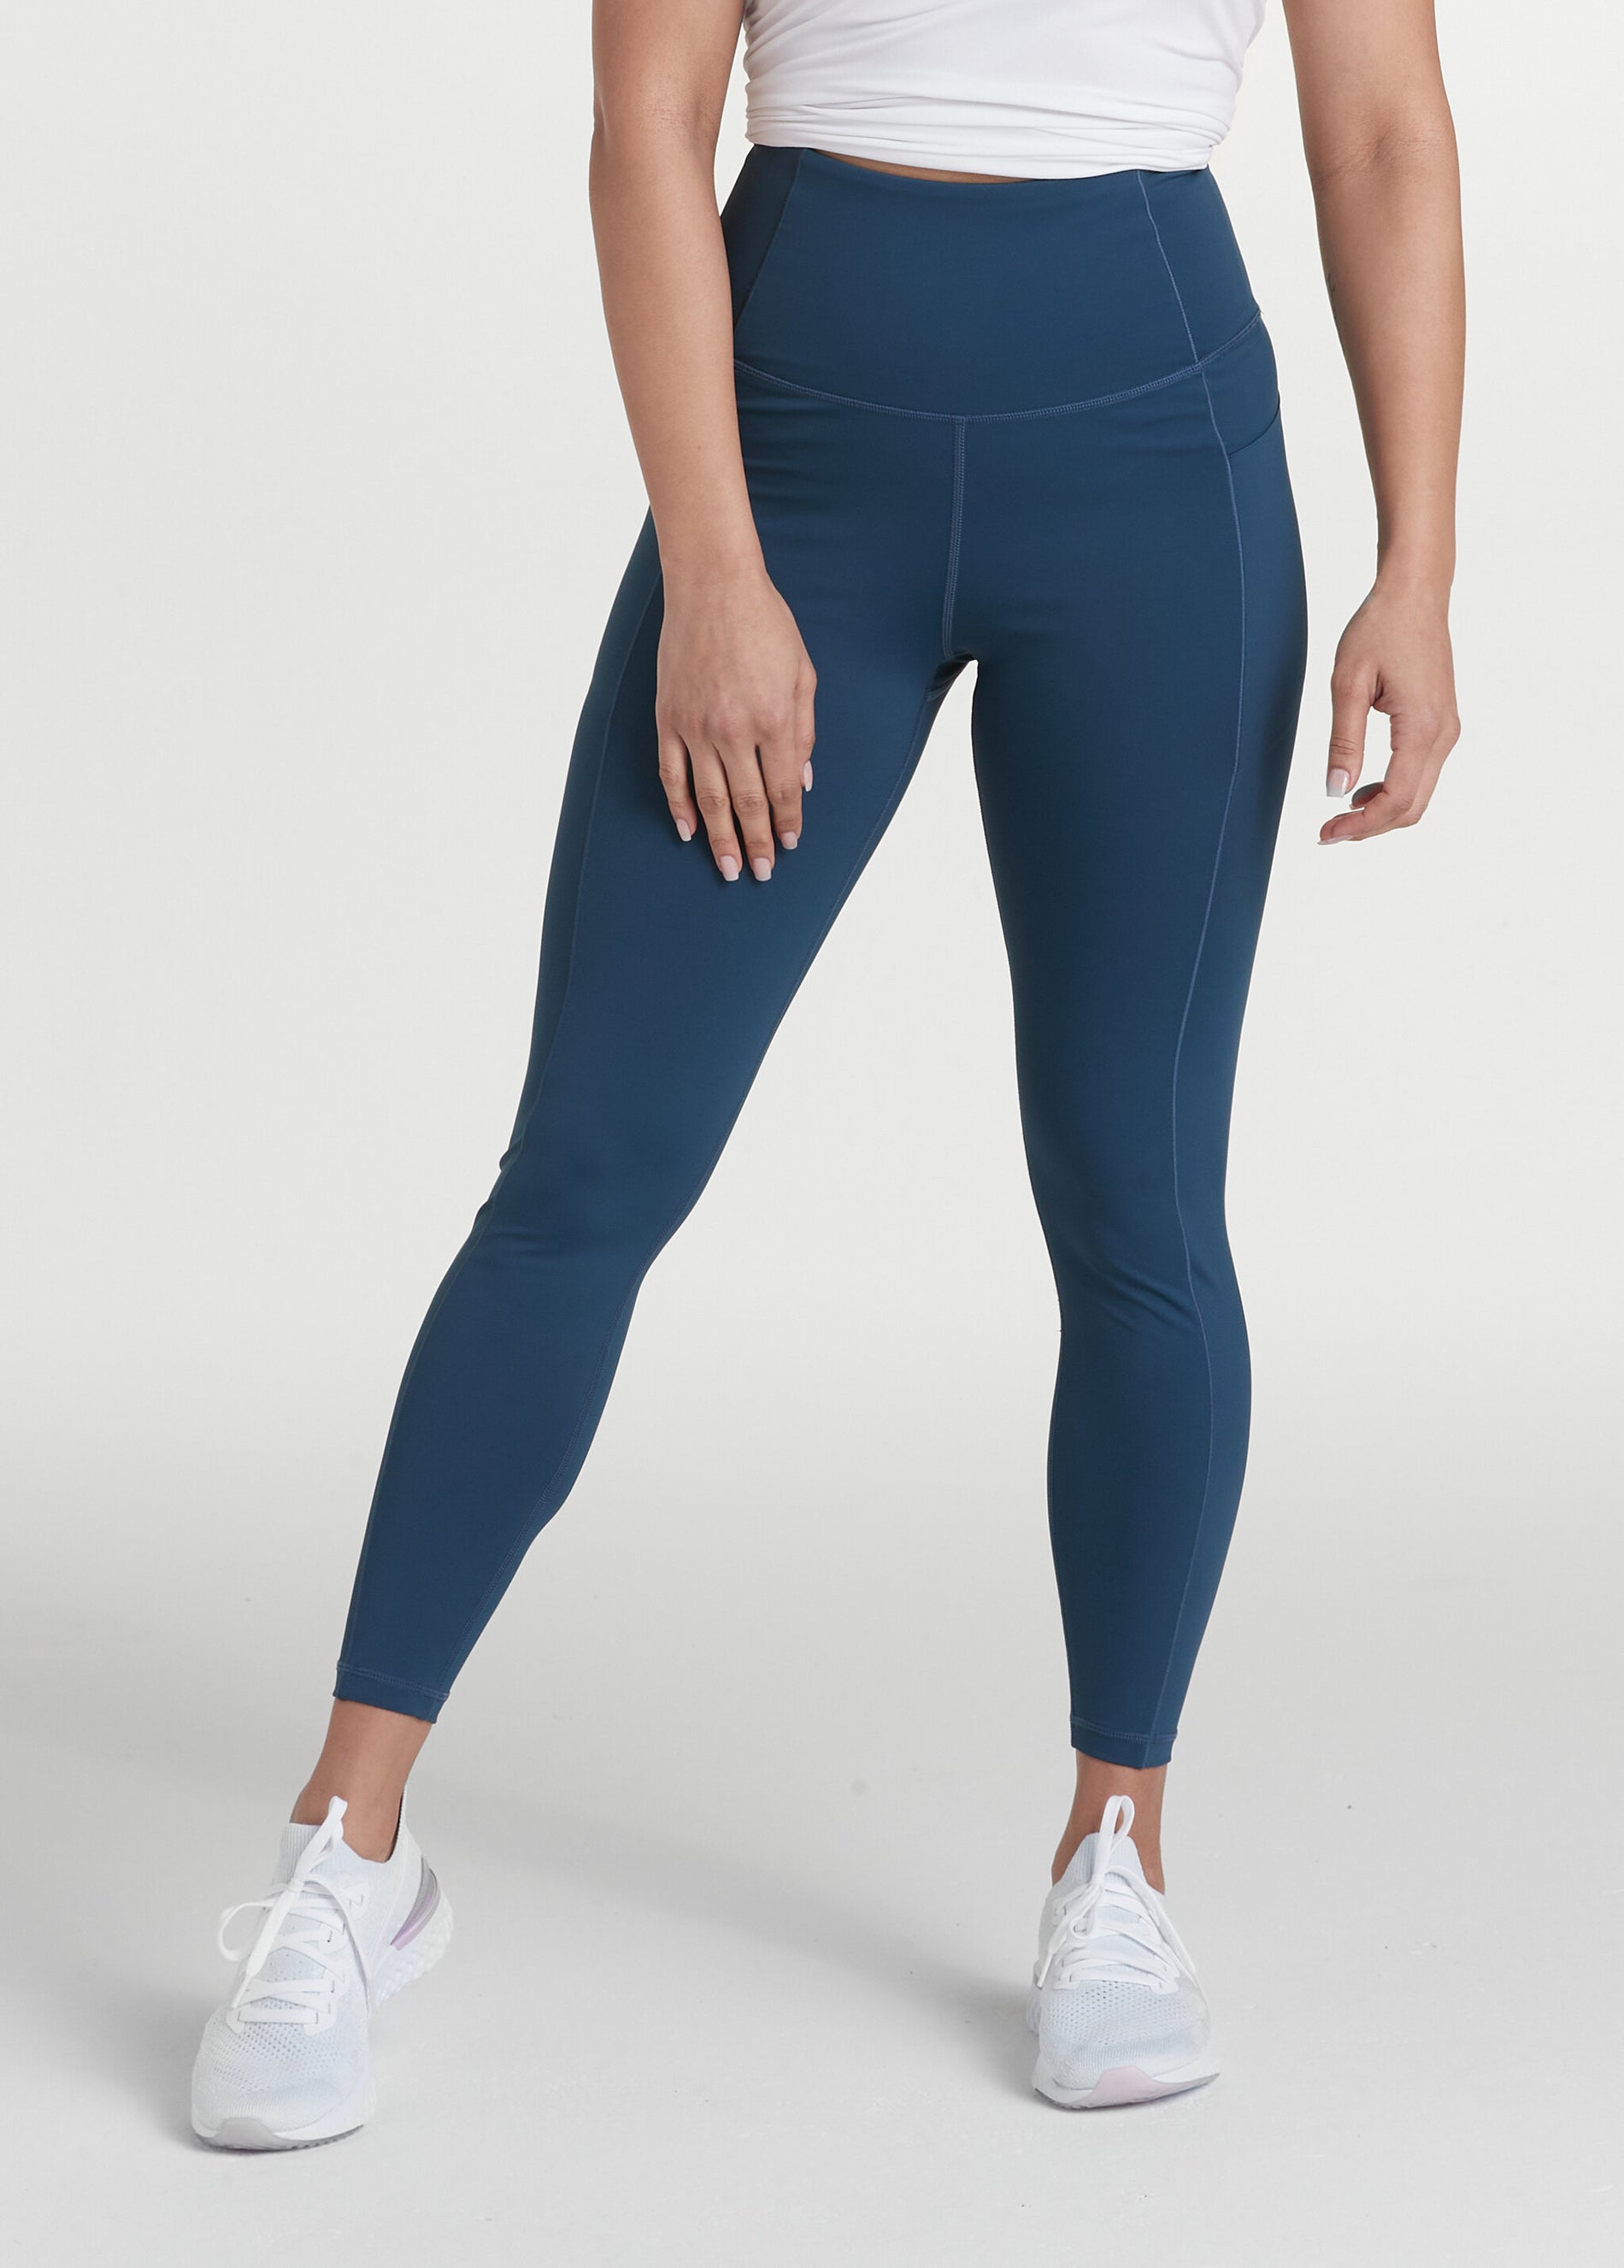 Lu Lu Yoga Leggings: Stylish, Align, And Stretchy For Womens Gym And Street  Wear From Aglobalsports, $0.88